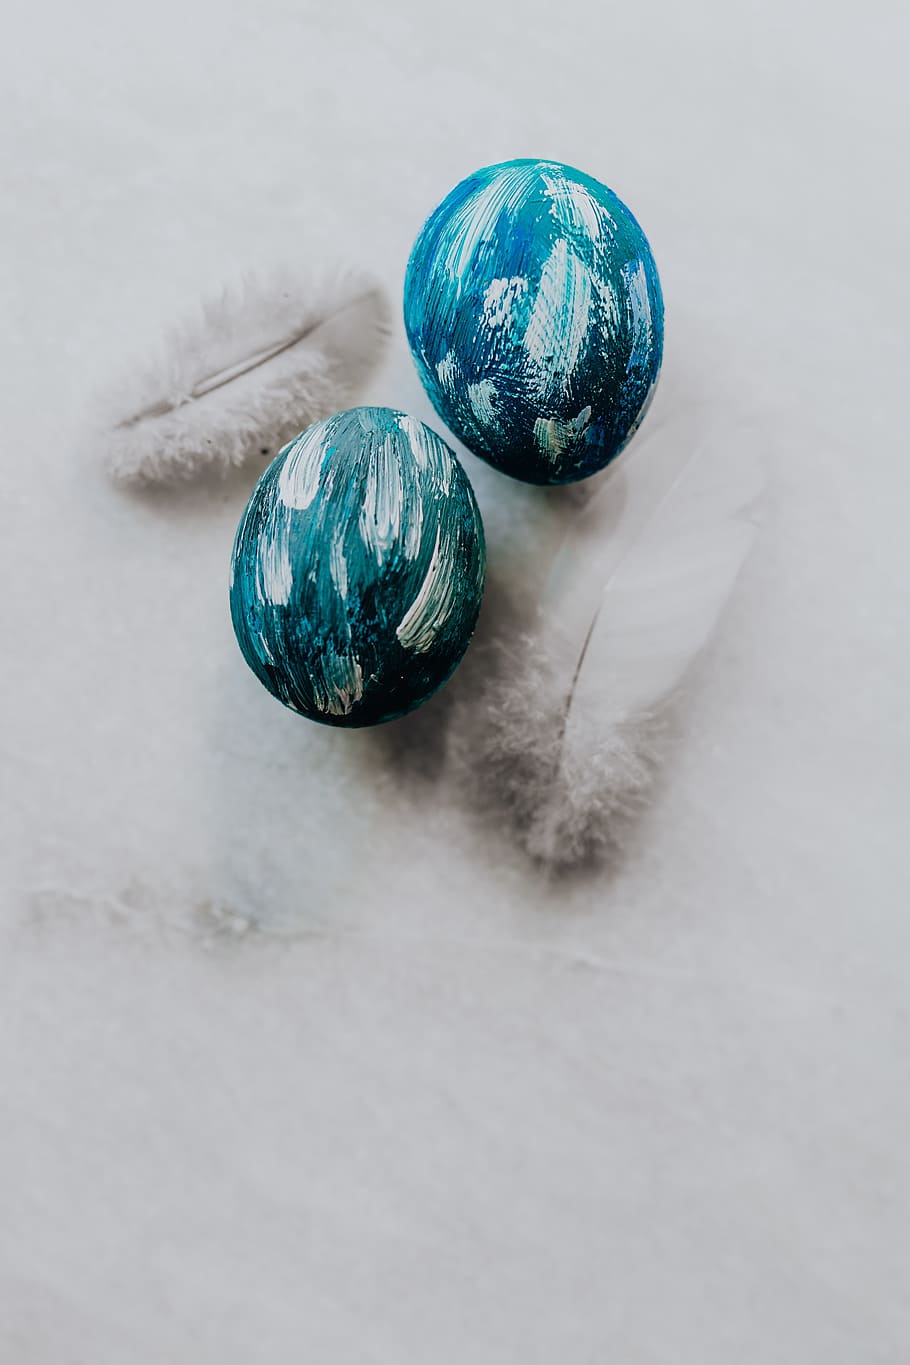 Blue Easter Eggs, colorful, painted, sphere, no people, still life